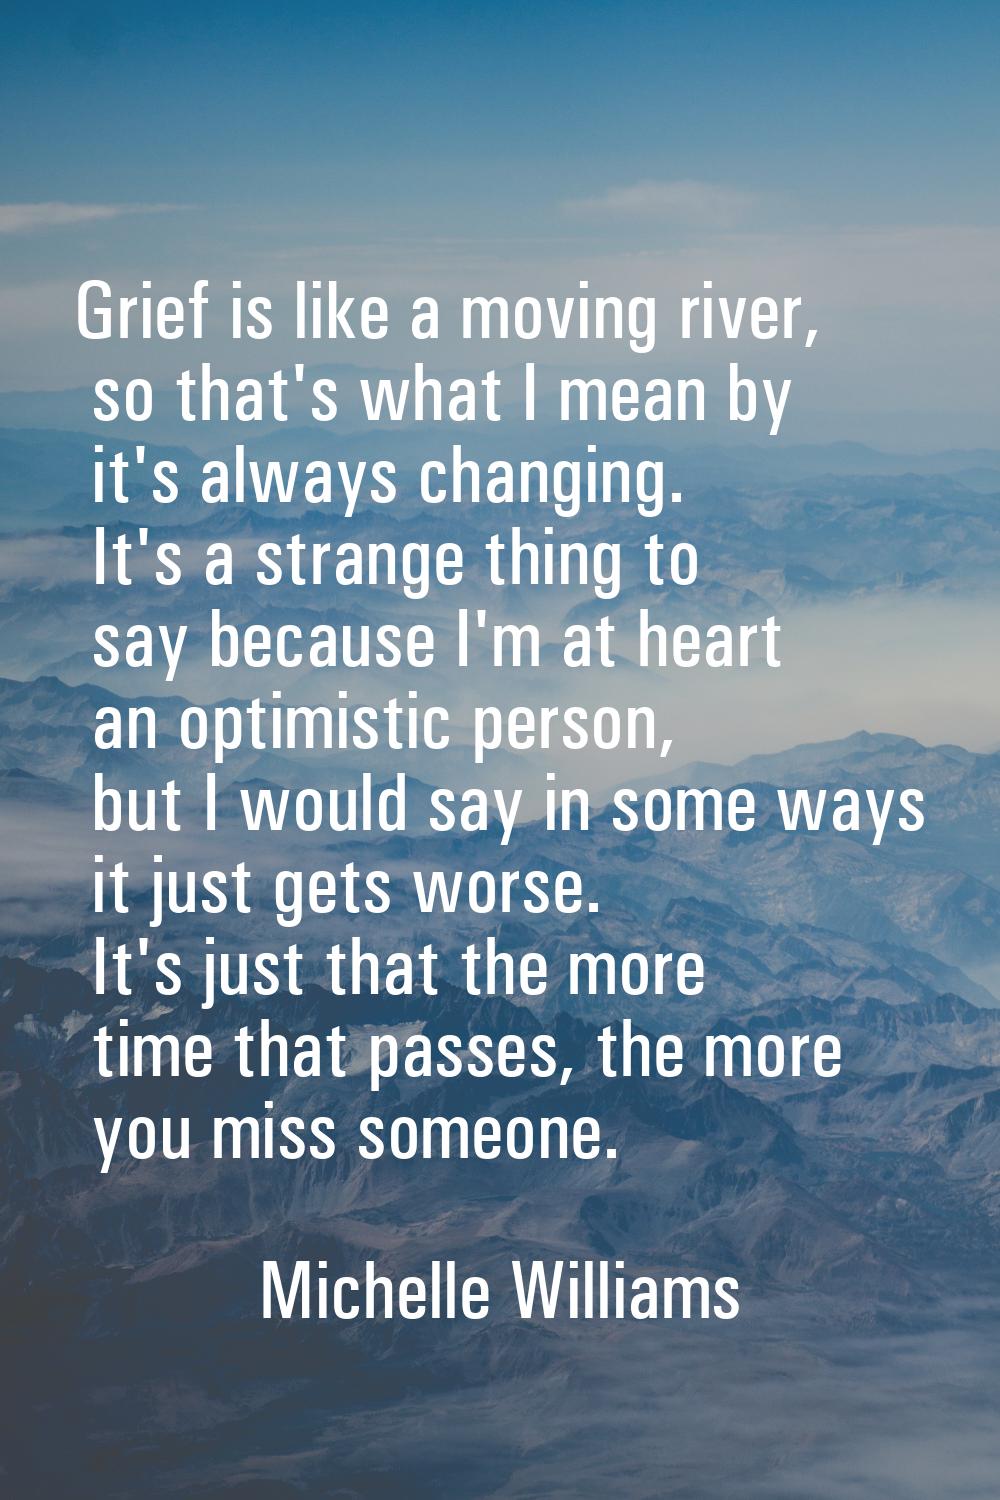 Grief is like a moving river, so that's what I mean by it's always changing. It's a strange thing t